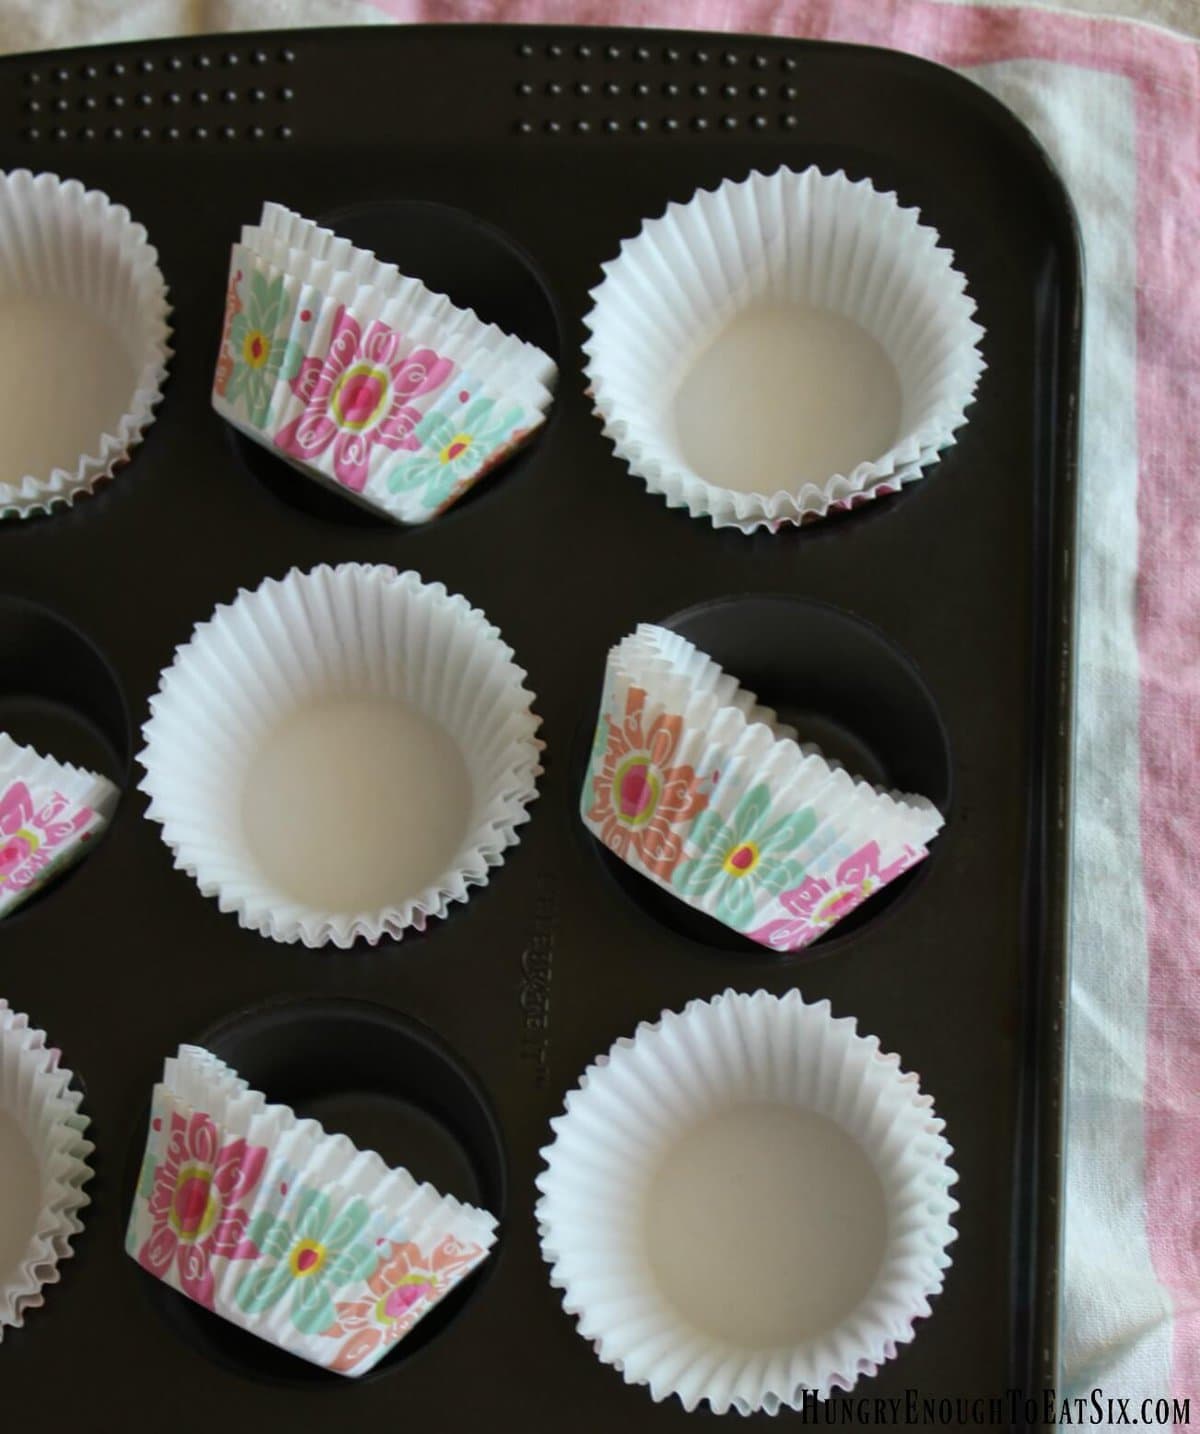 Mini muffin pan with white and floral paper lines in the cups.